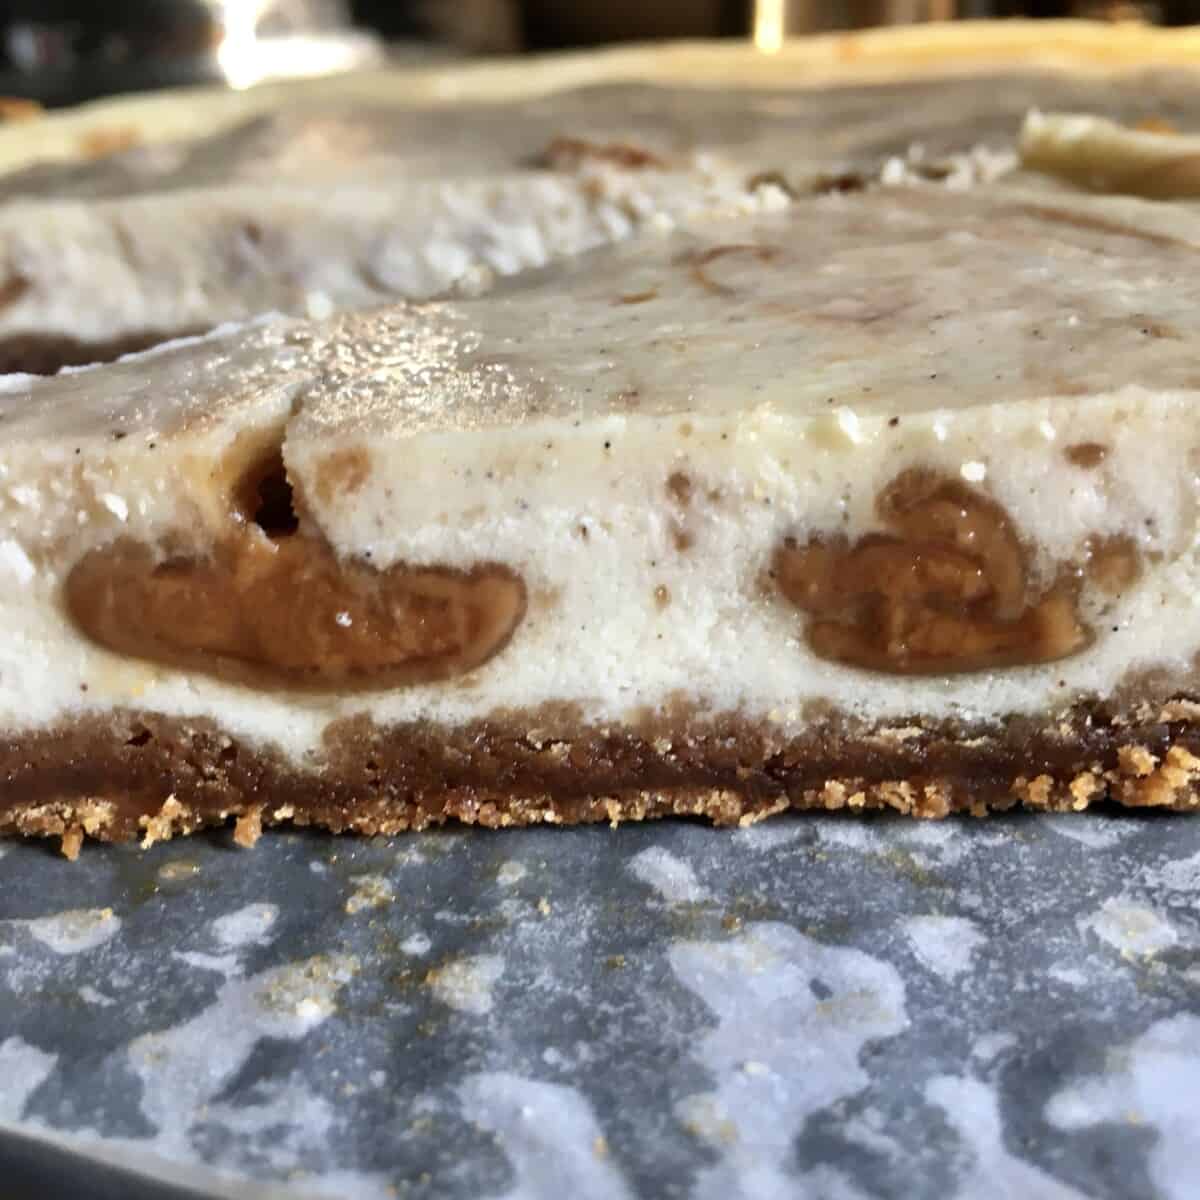 sideview of biscoff cheesecake showing 3 dots of biscoff spread in the middle